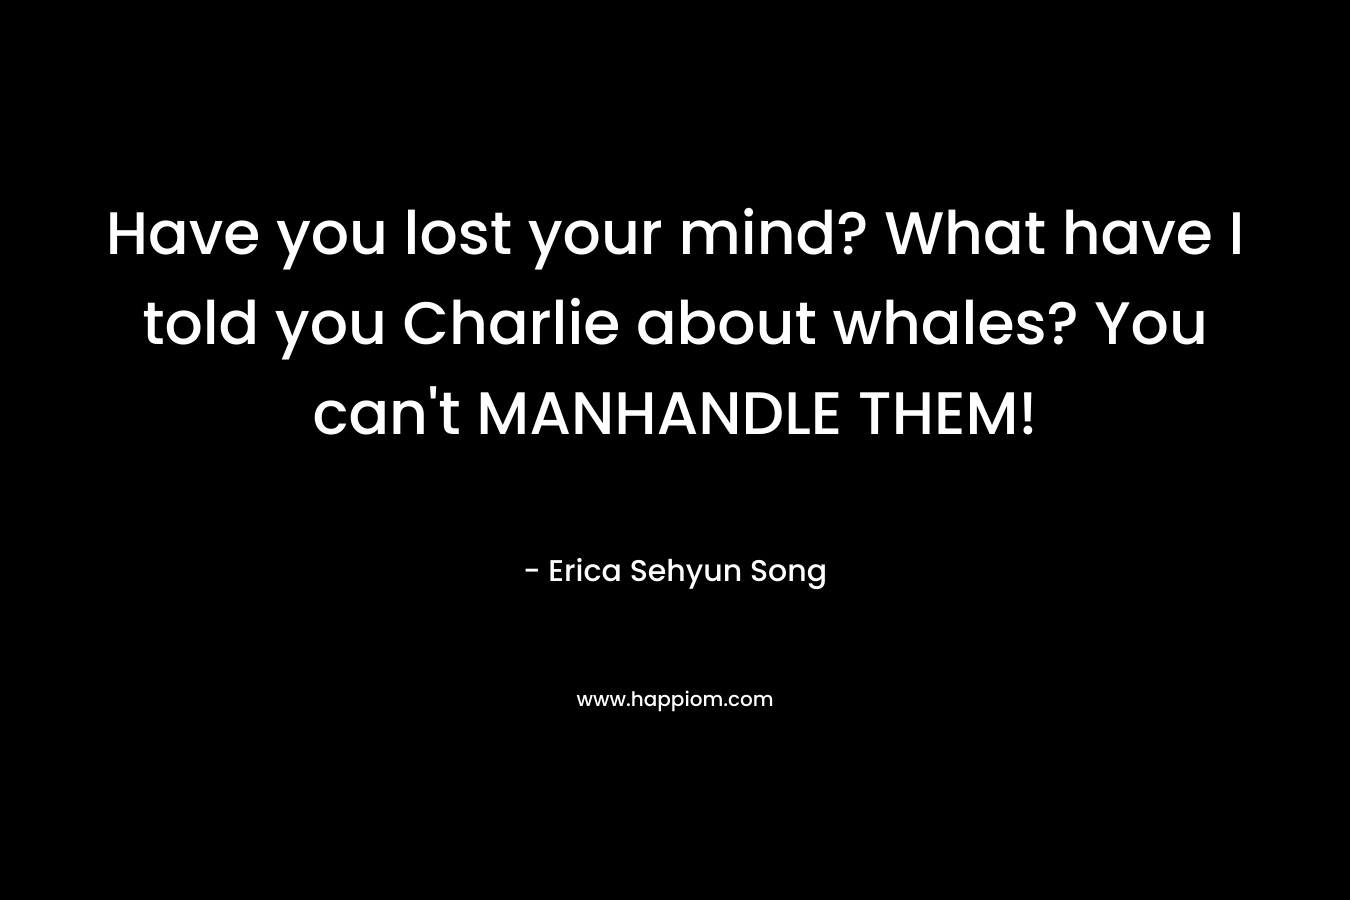 Have you lost your mind? What have I told you Charlie about whales? You can’t MANHANDLE THEM! – Erica Sehyun Song